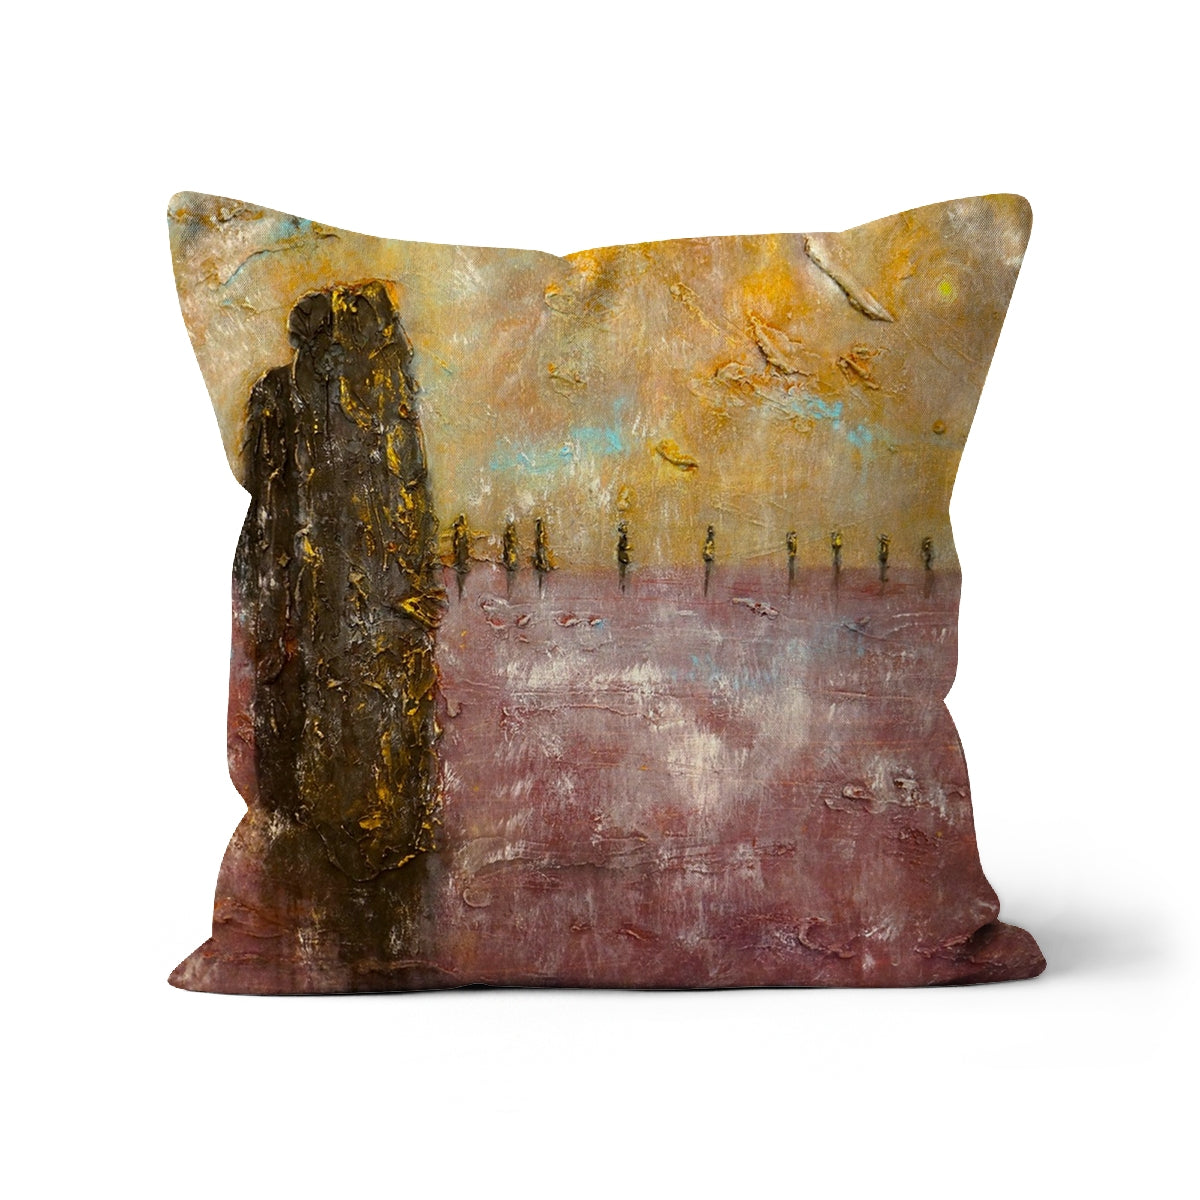 Bordgar Mist Orkney Art Gifts Cushion-Cushions-Orkney Art Gallery-Linen-24"x24"-Paintings, Prints, Homeware, Art Gifts From Scotland By Scottish Artist Kevin Hunter